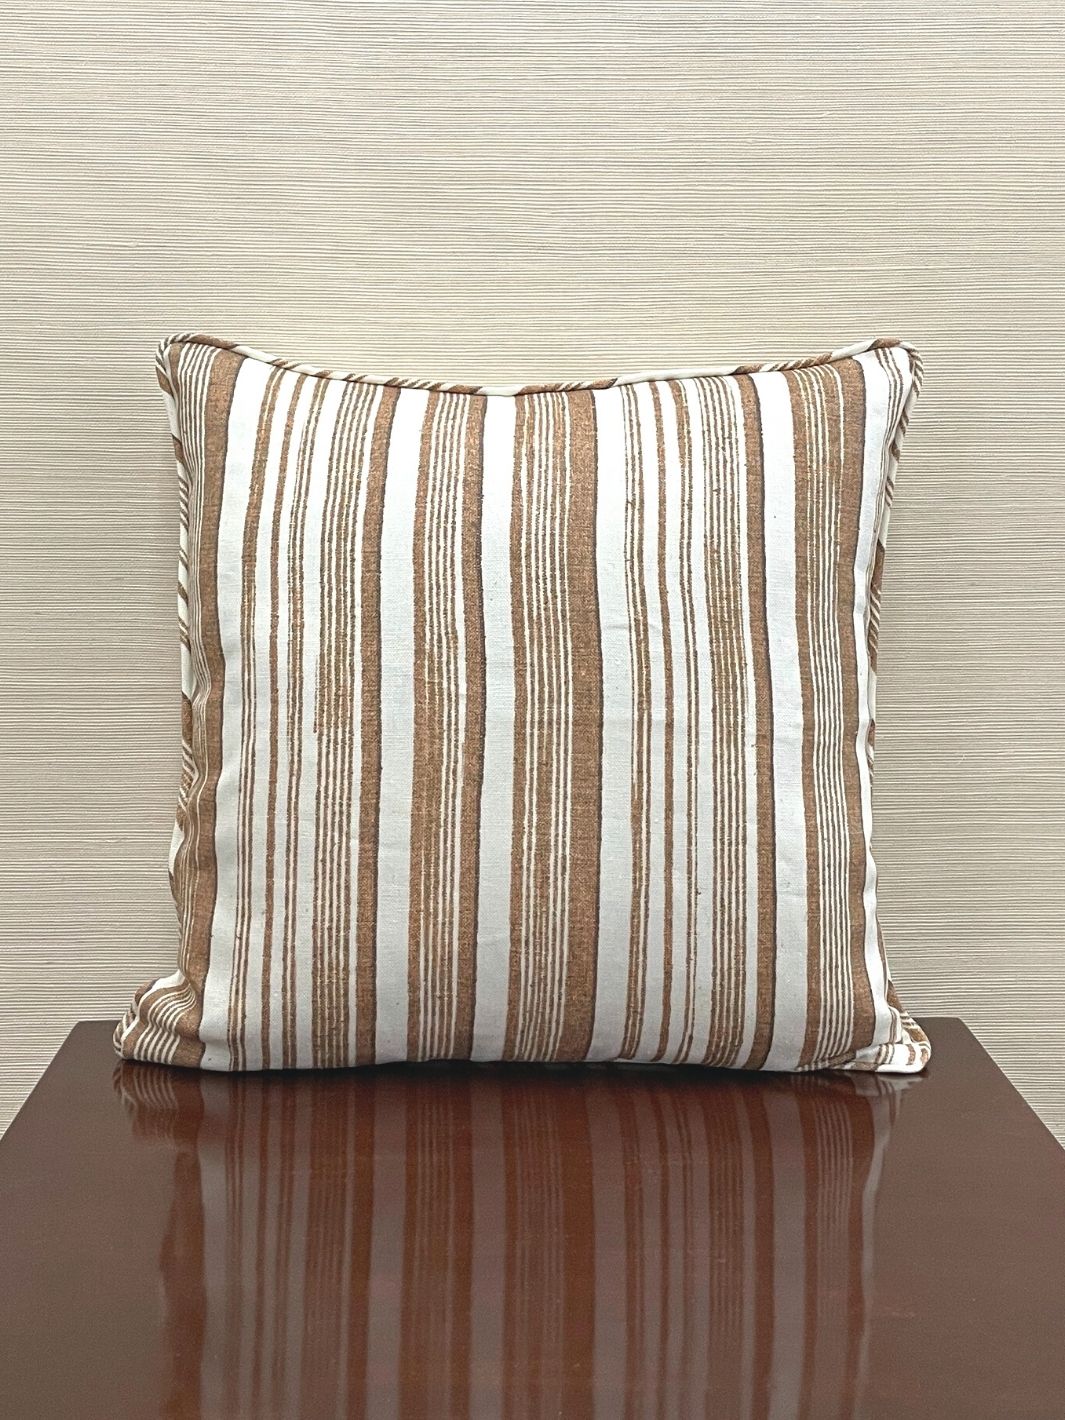 'Stuart Stripe' Throw Pillow by Nathan Turner - Brown on Flax Linen